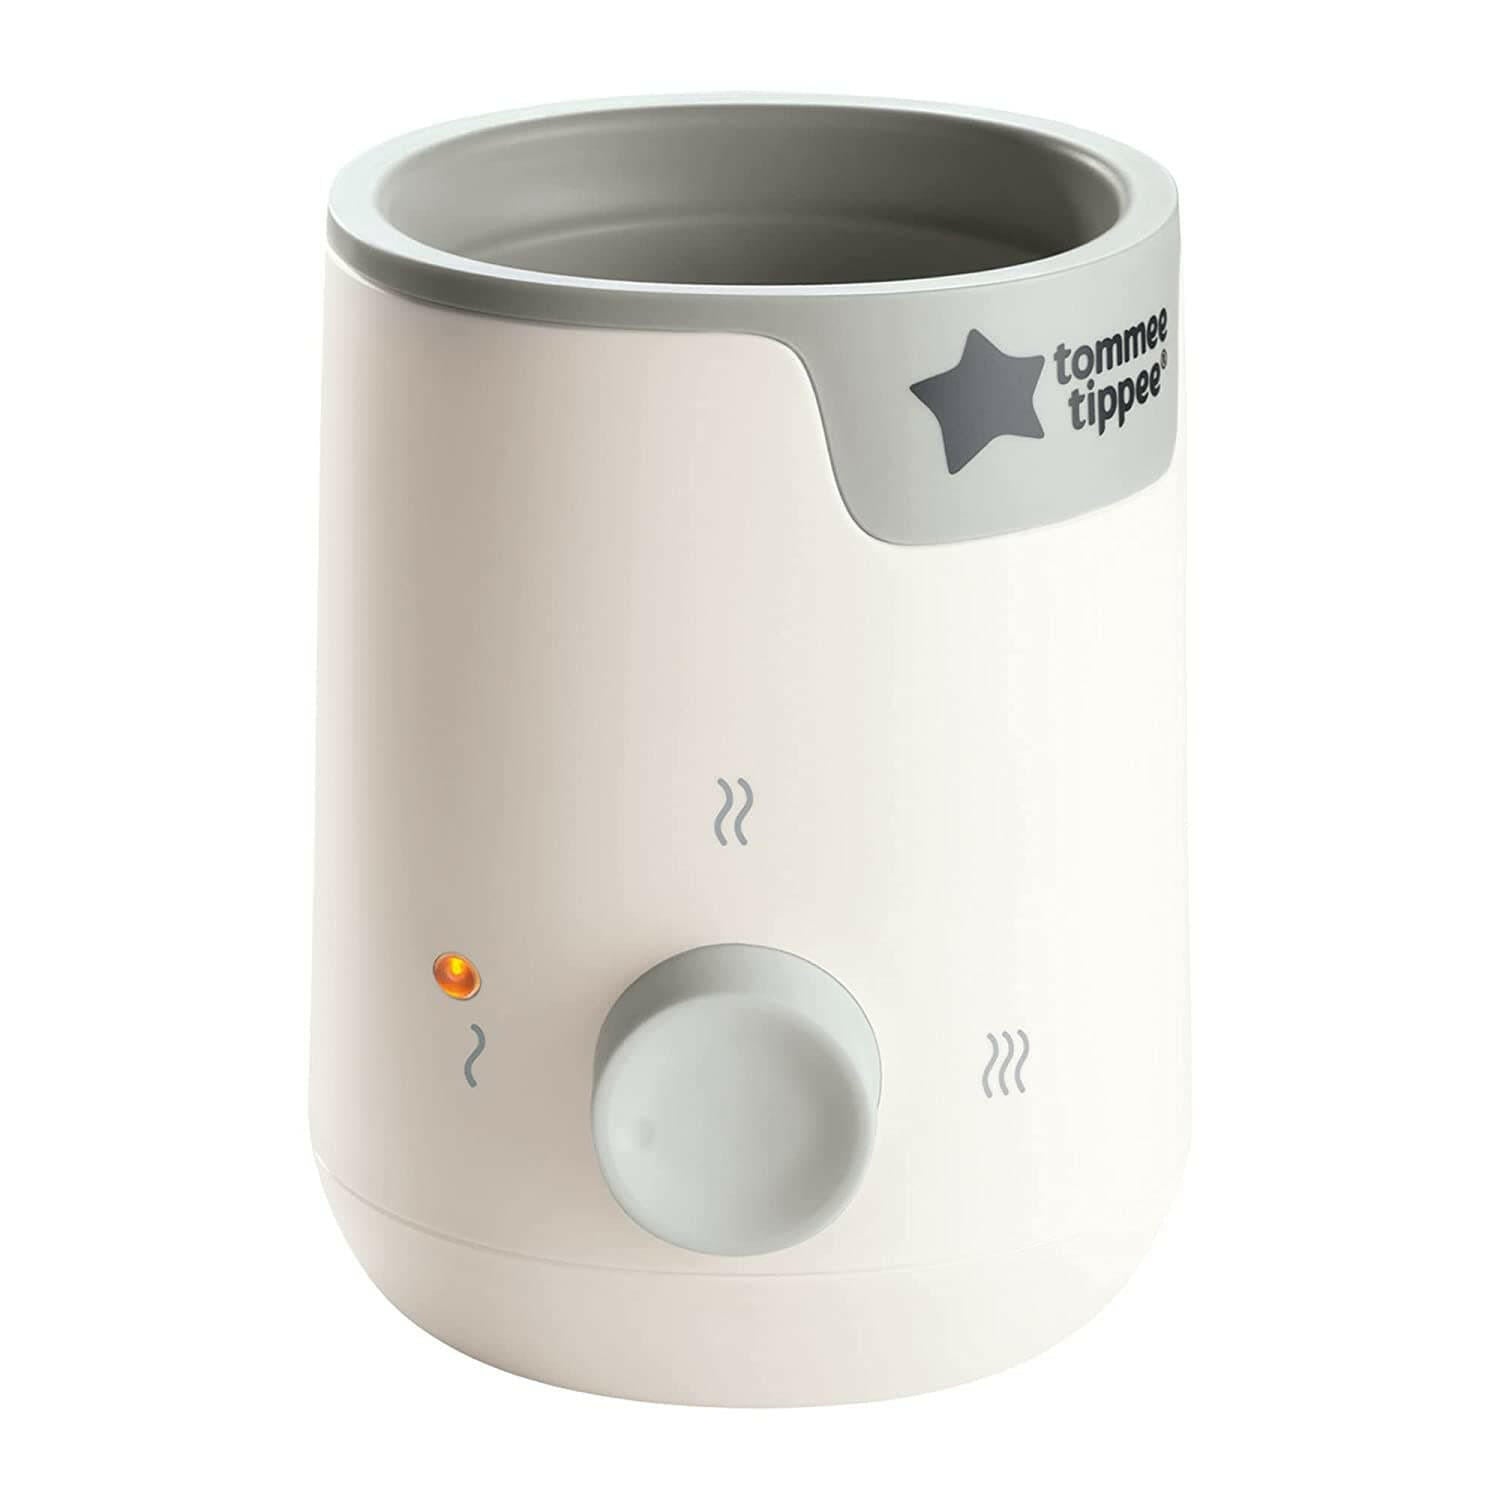 Tommee Tippee Electric Bottle And Food Warmer For Baby Feeding